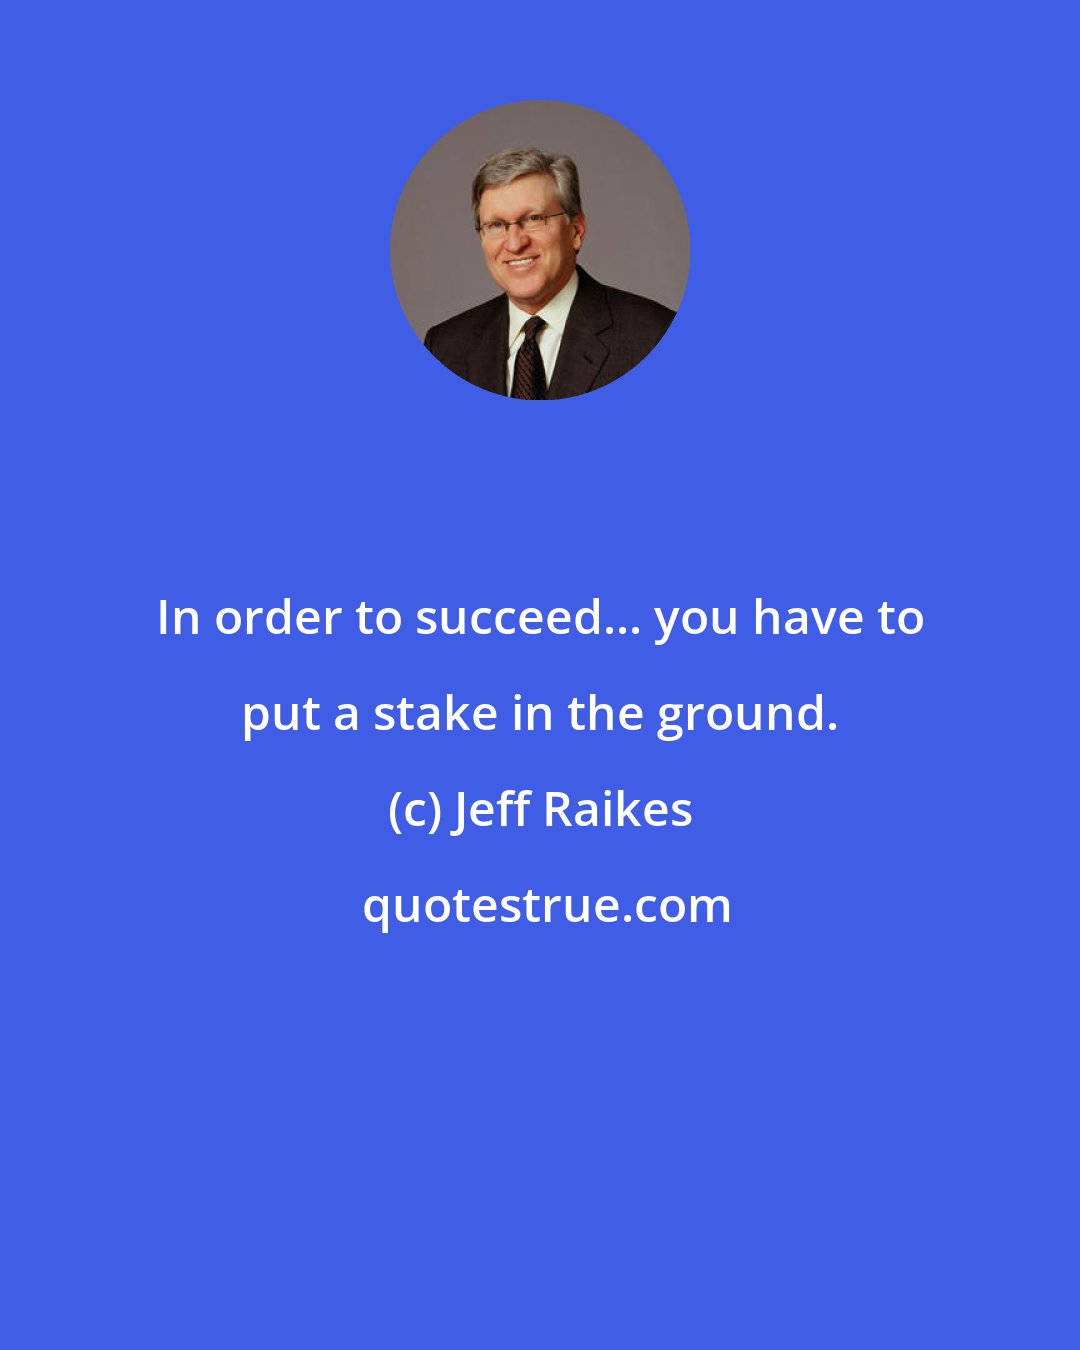 Jeff Raikes: In order to succeed... you have to put a stake in the ground.